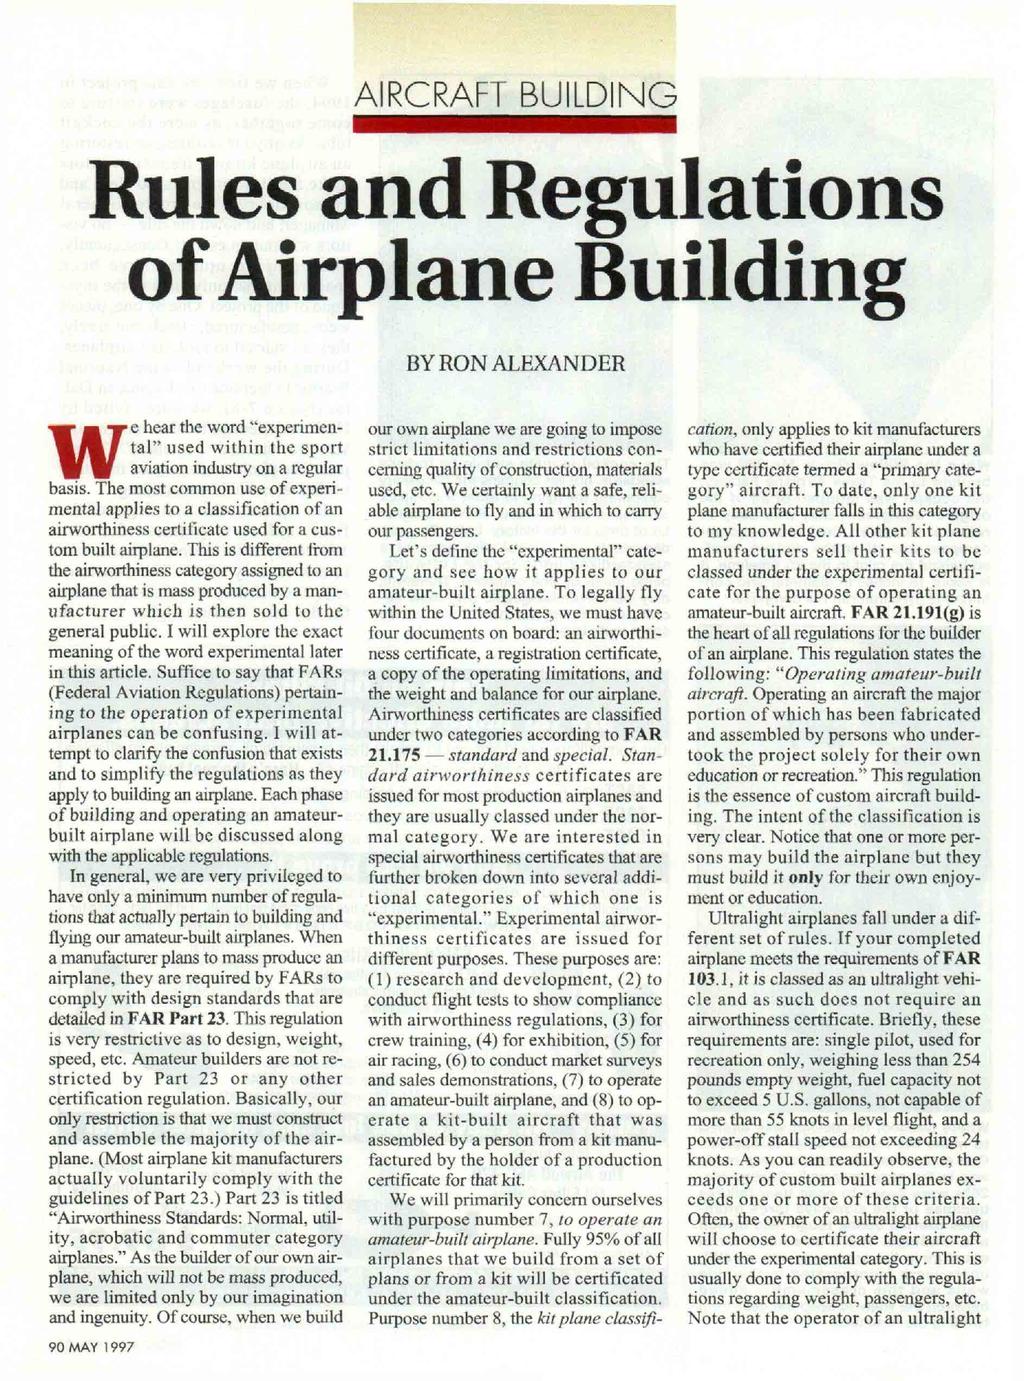 :;""',,,,,,;,;;;;*":" AIRCRAFT BUILDING Rules and Regulations of Airplane Building BY RON ALEXANDER We hear the word "experimental" used within the sport aviation industry on a regular basis.